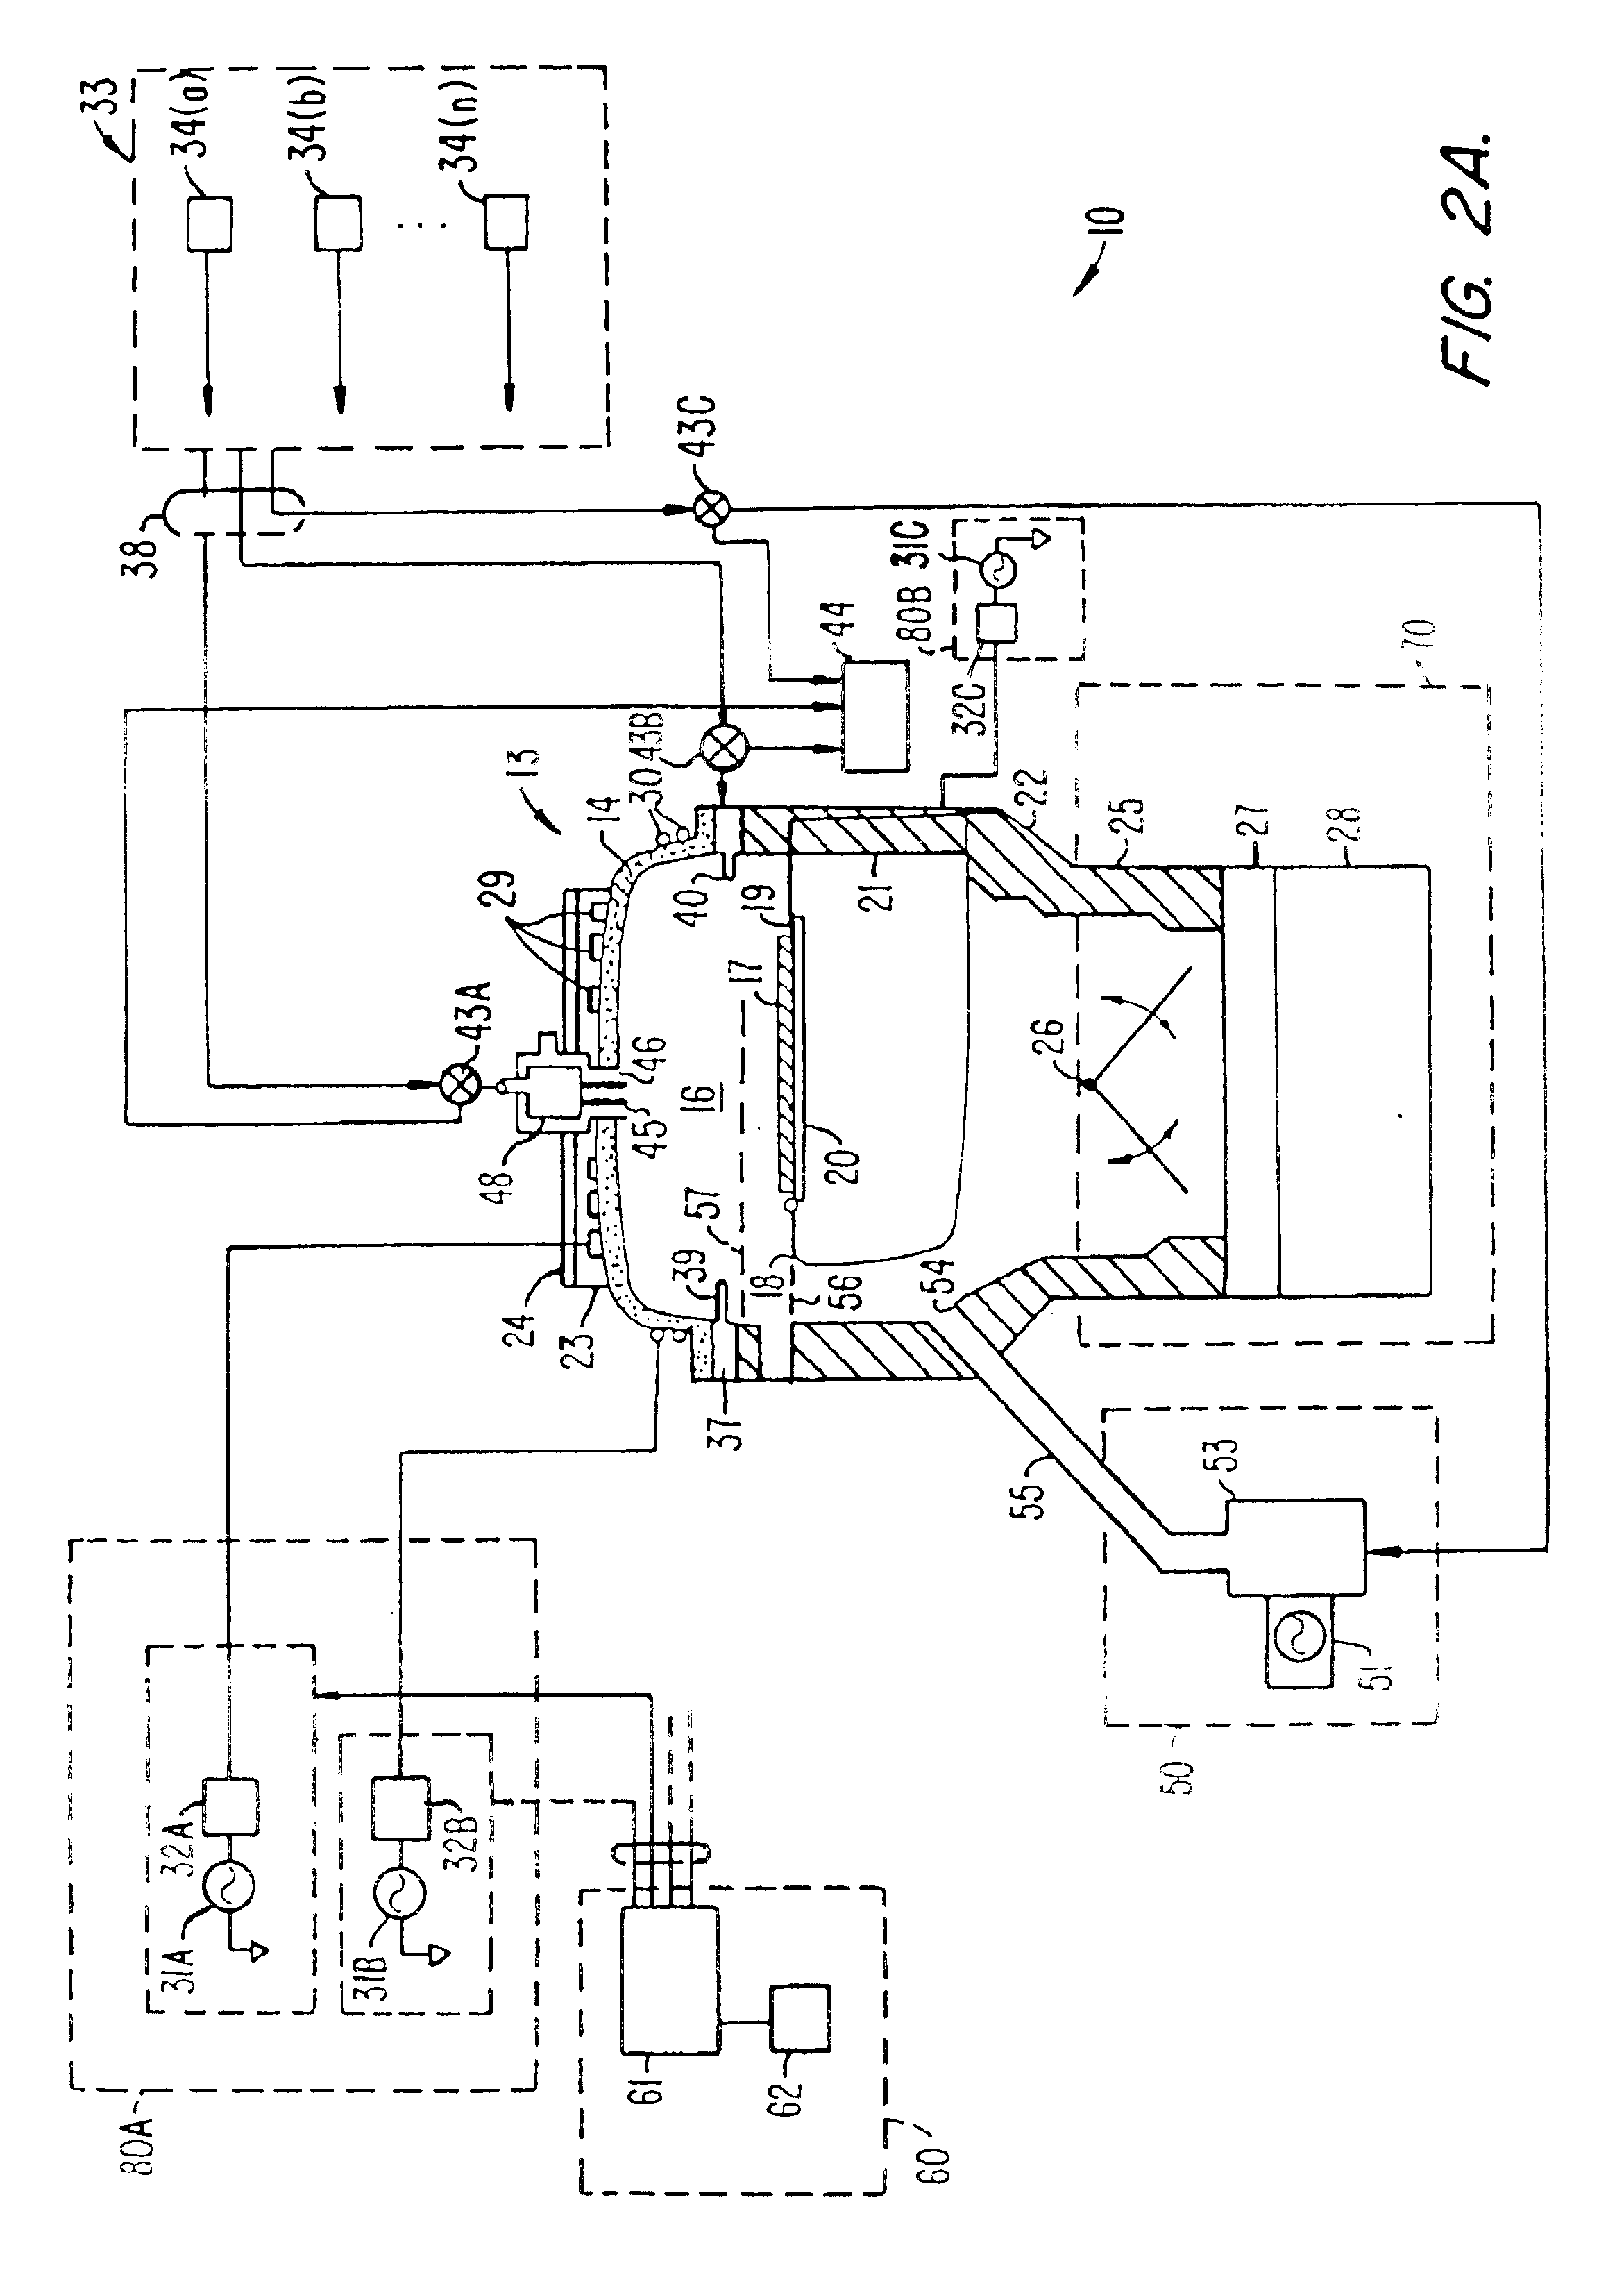 Method of cleaning a semiconductor processing chamber